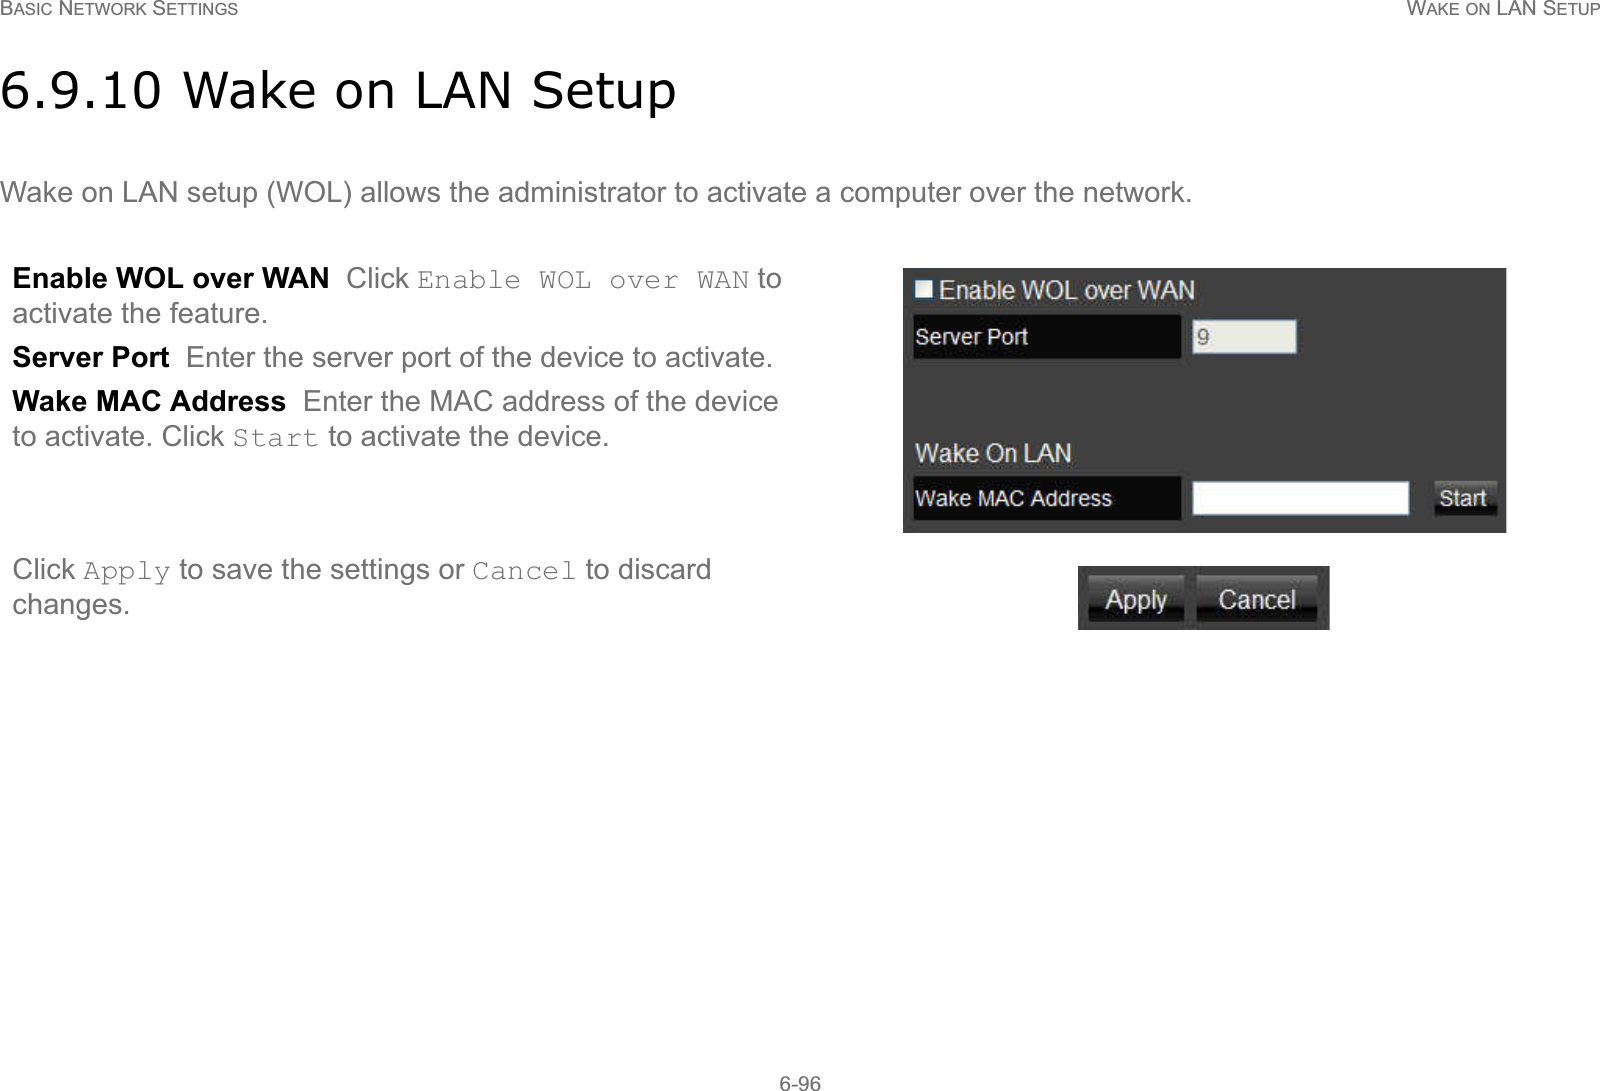 BASIC NETWORK SETTINGS WAKE ON LAN SETUP6-966.9.10 Wake on LAN SetupWake on LAN setup (WOL) allows the administrator to activate a computer over the network.Enable WOL over WAN  Click Enable WOL over WAN to activate the feature.Server Port  Enter the server port of the device to activate.Wake MAC Address  Enter the MAC address of the device to activate. Click Start to activate the device.Click Apply to save the settings or Cancel to discard changes.